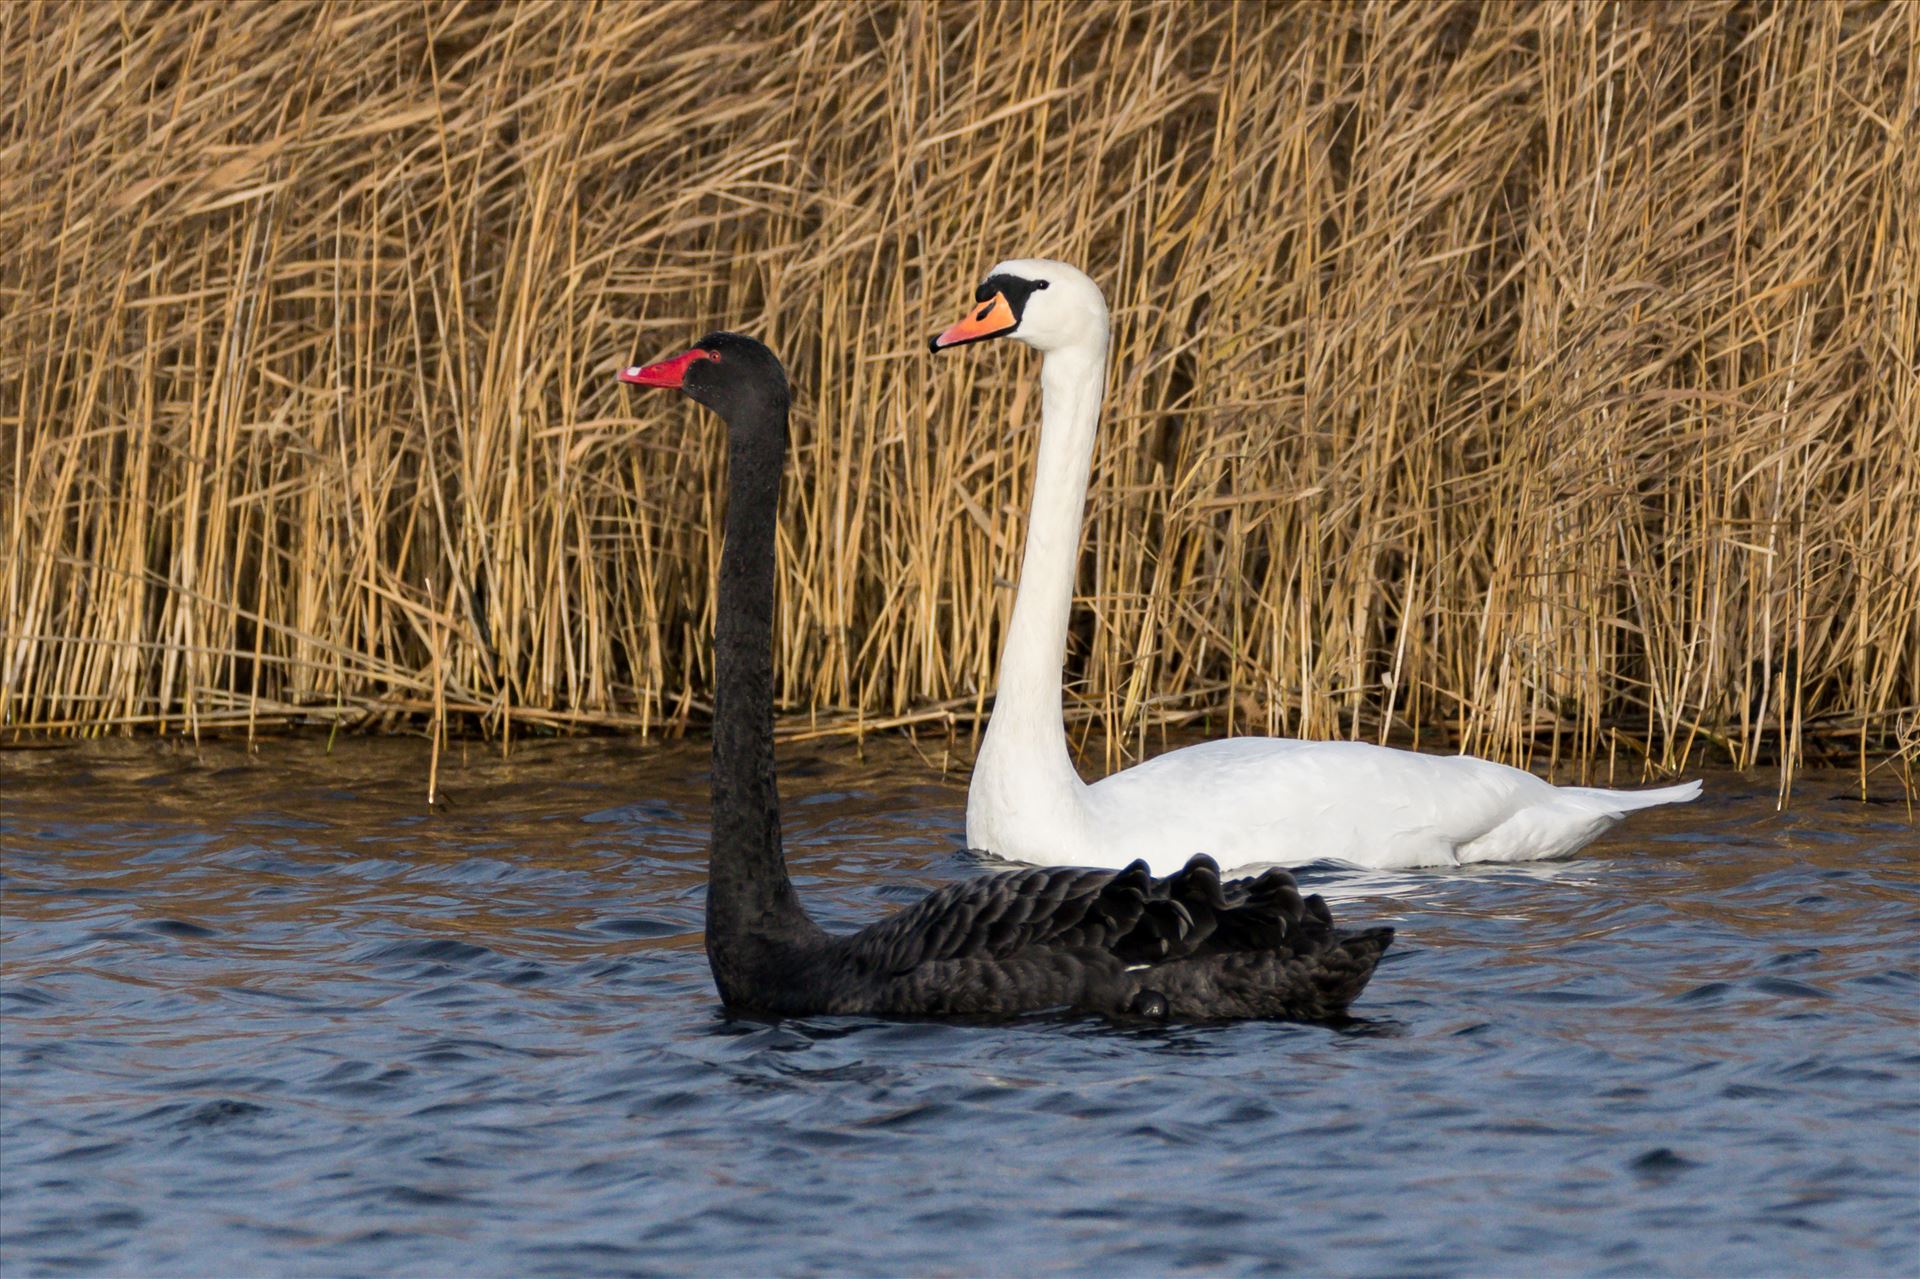 Black and White Swan RSPB Saltholme - Black and White Swans, hardly ever see them together, taken at RSPB Saltholme by AJ Stoves Photography